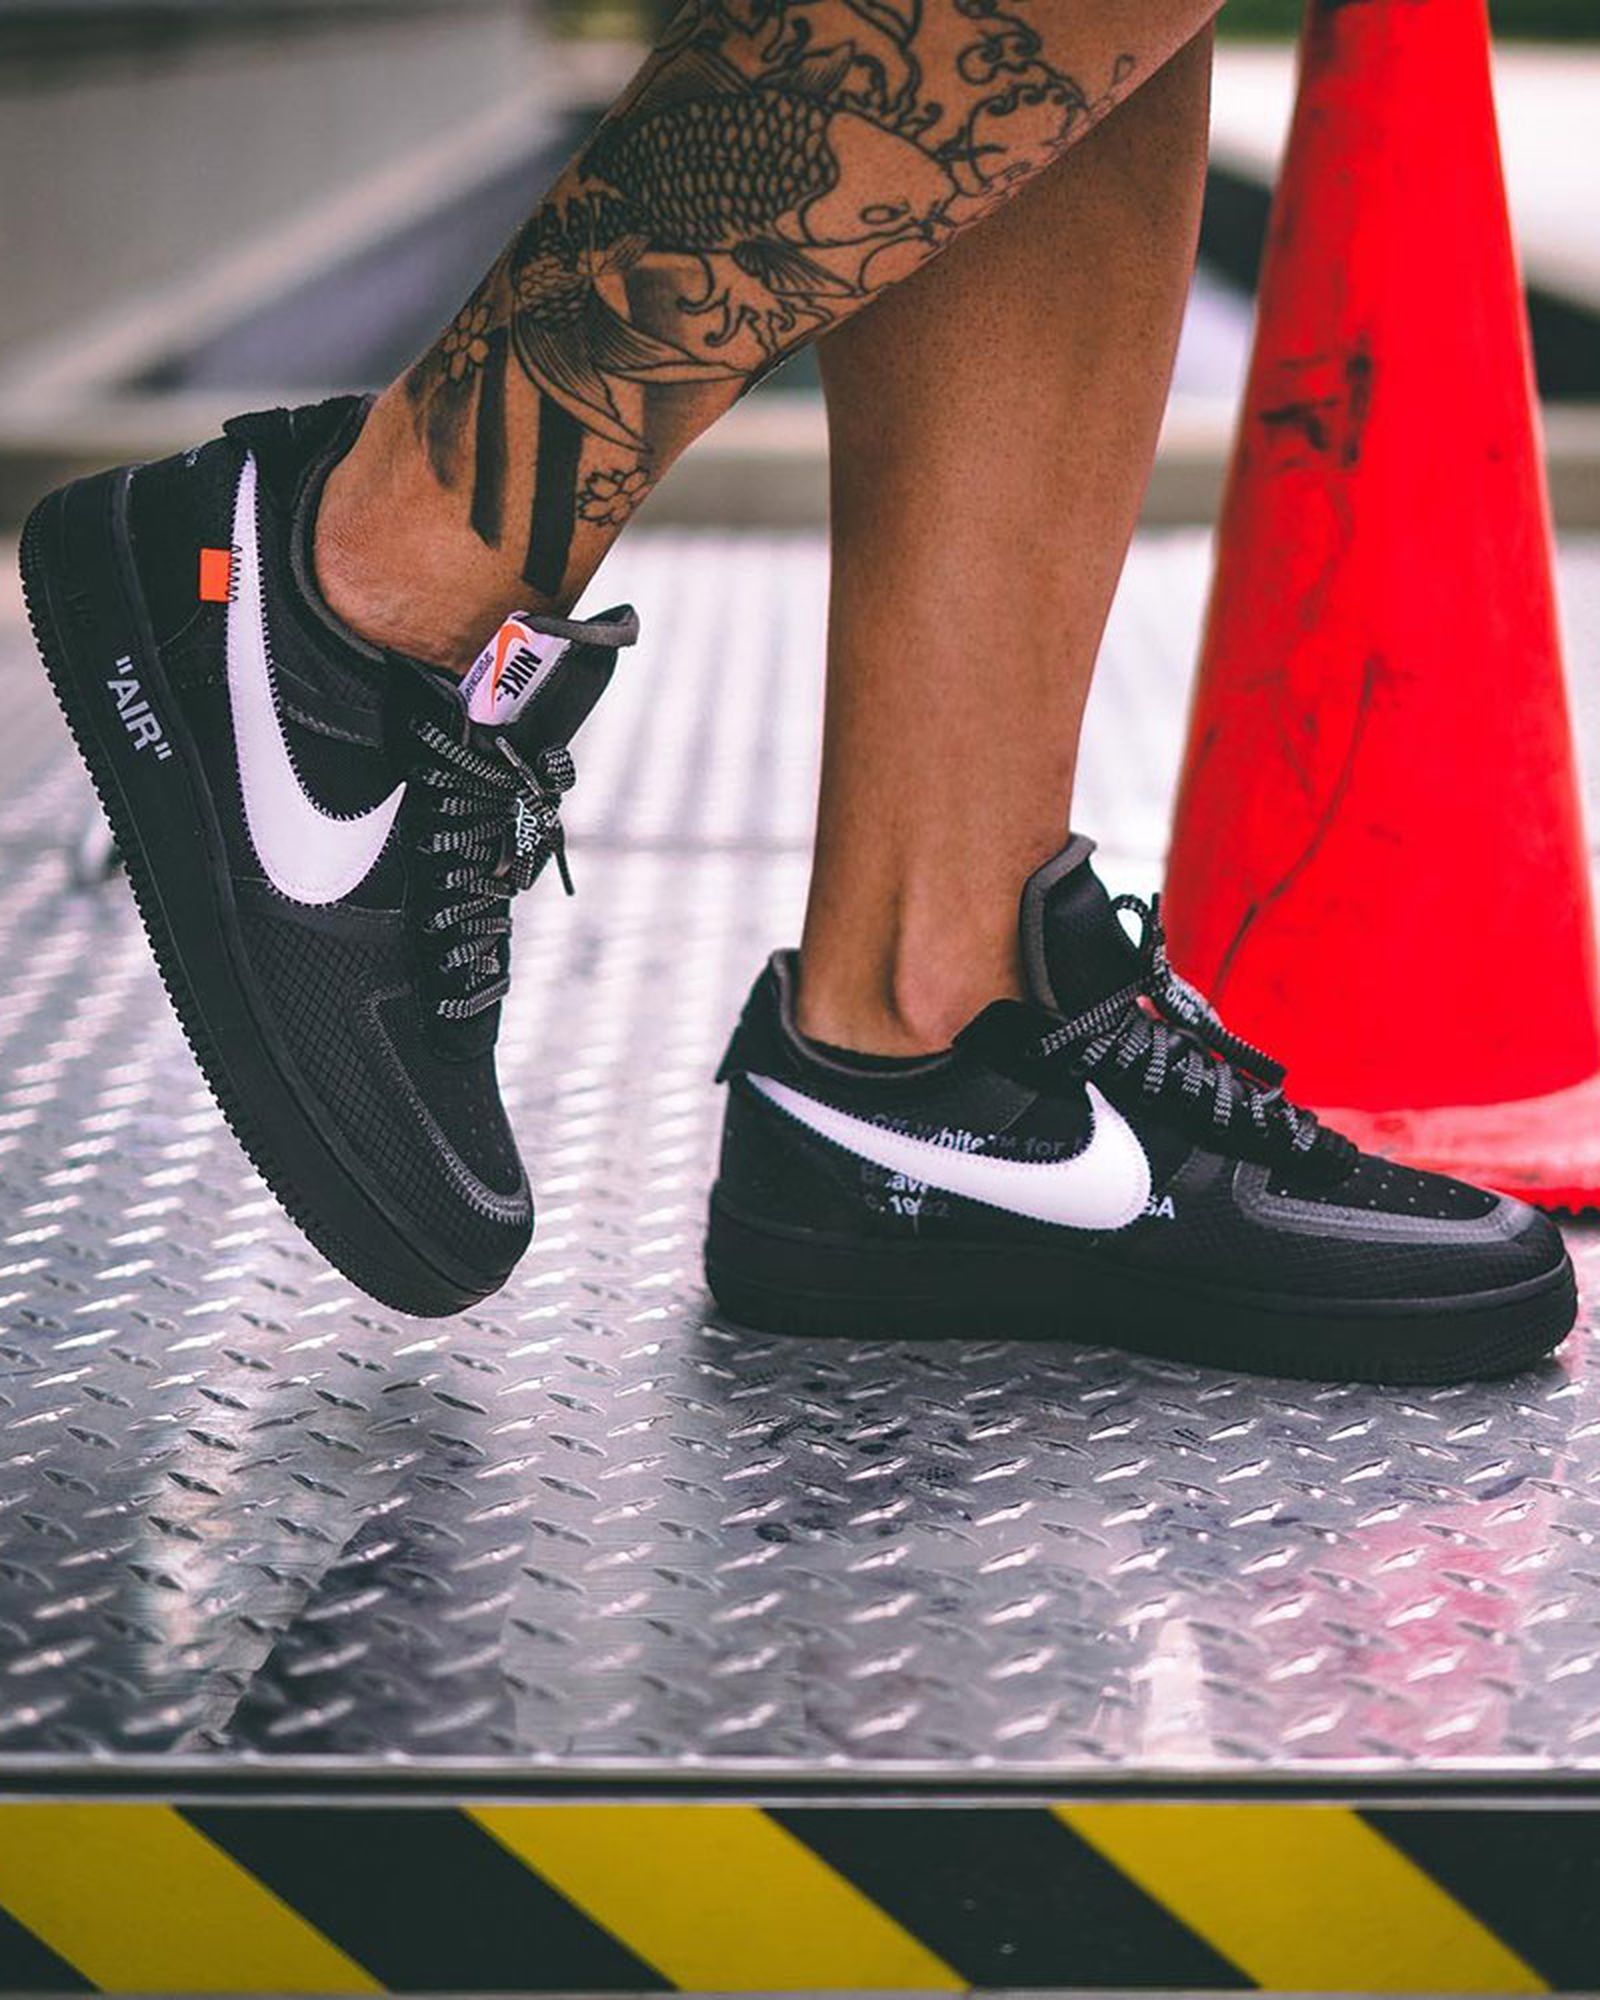 bureau vasteland beest OFF-WHITE x Nike Air Force 1 “Black”: On-Foot Pictures Surfaced